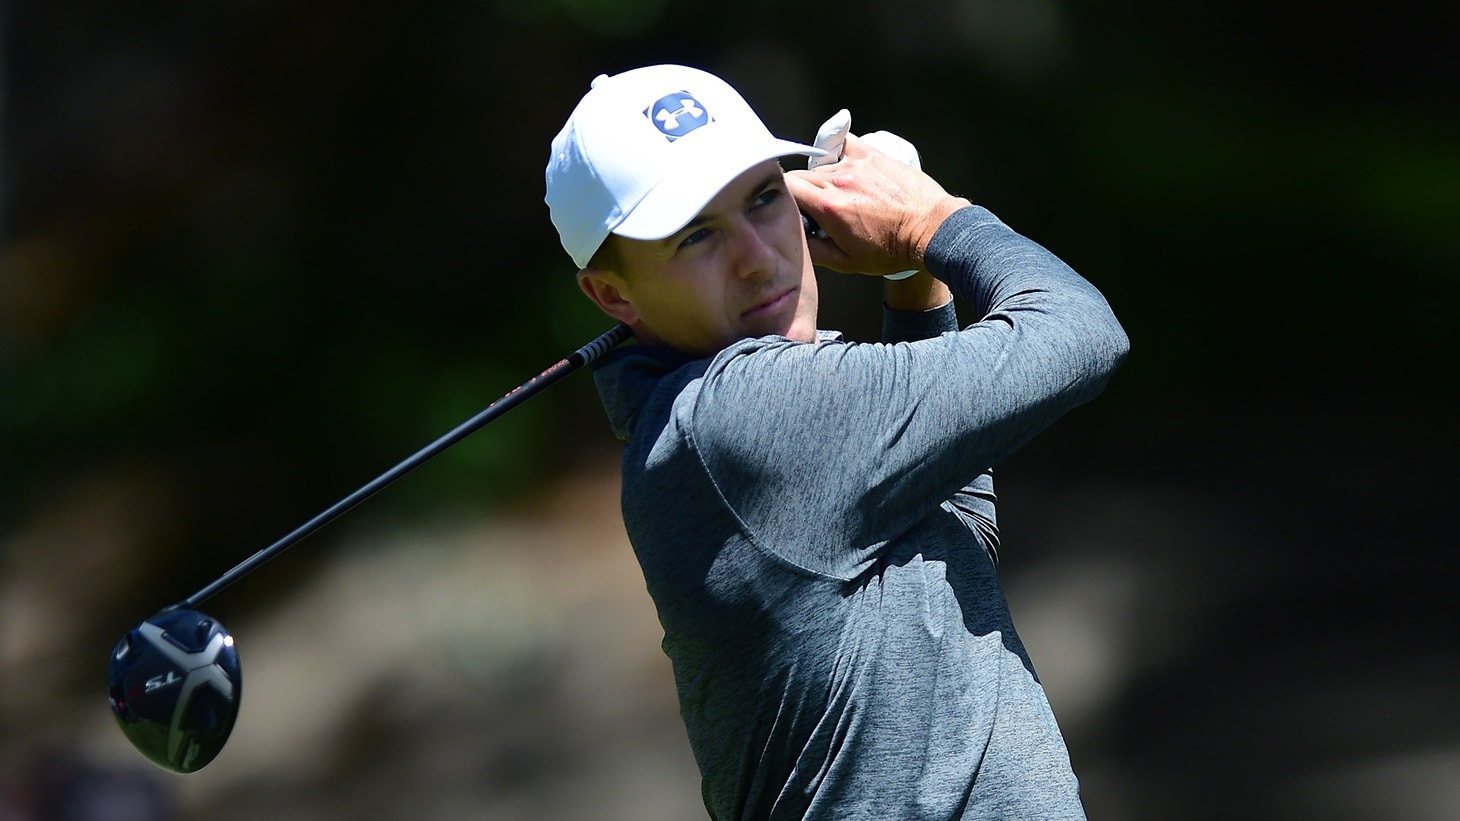 Jordan Spieth tees off with his Titleist TS3 driver during action at the 2019 AT&T Byron Nelson